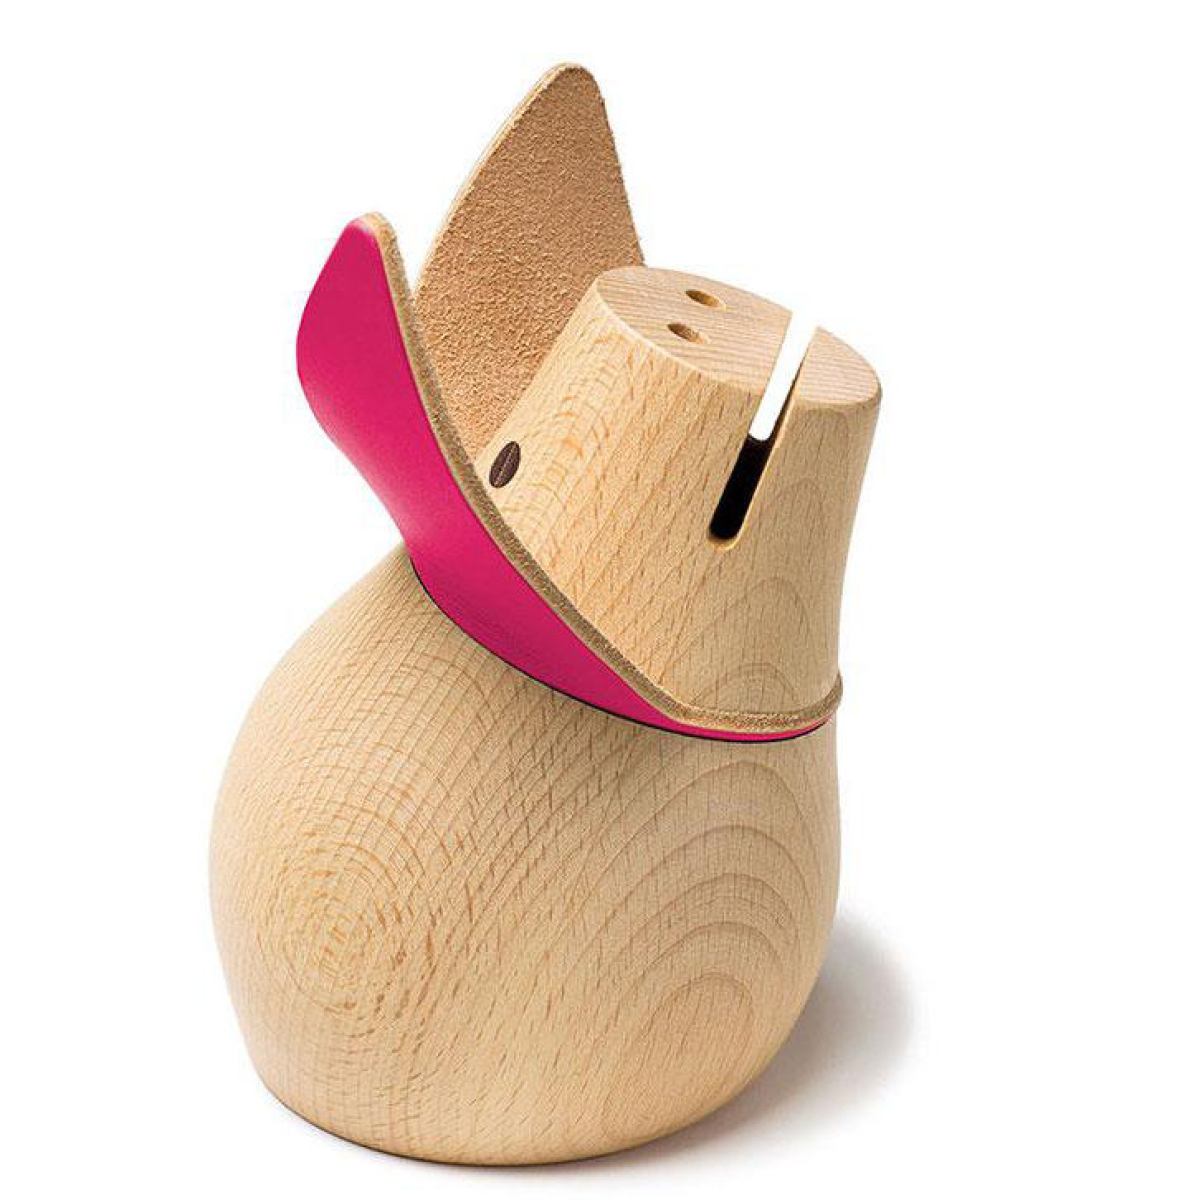 Money Box / Piggy Bank made of Wood with Leather Ears (two colors)